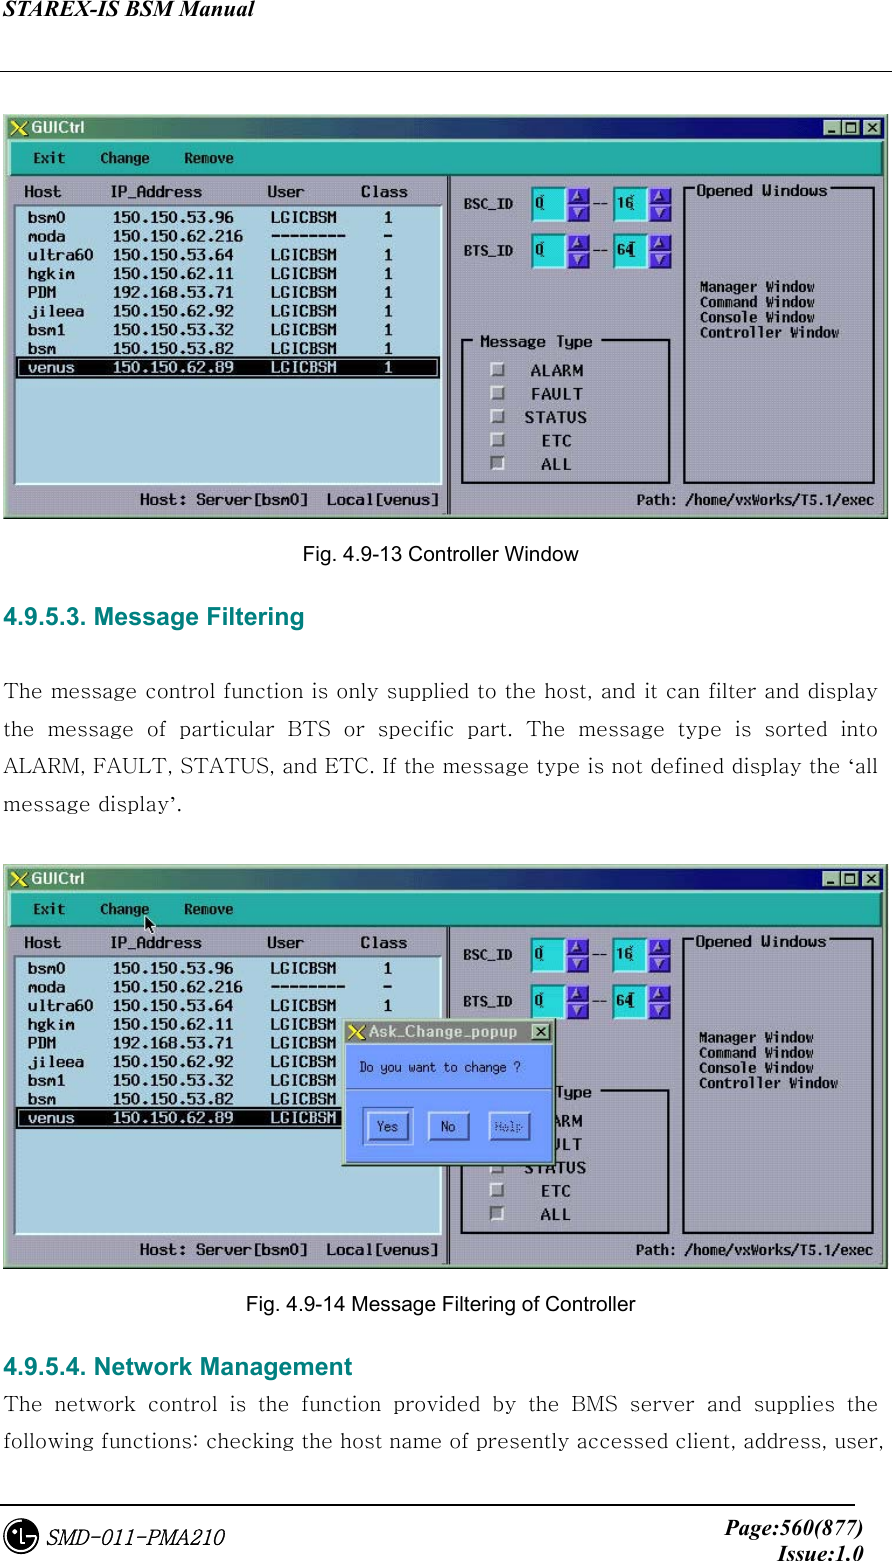 STAREX-IS BSM Manual     Page:560(877)Issue:1.0SMD-011-PMA210   Fig. 4.9-13 Controller Window 4.9.5.3. Message Filtering  The message control function is only supplied to the host, and it can filter and display the  message  of  particular  BTS  or  specific  part.  The  message  type  is  sorted  into ALARM, FAULT, STATUS, and ETC. If the message type is not defined display the ‘all message display’.   Fig. 4.9-14 Message Filtering of Controller 4.9.5.4. Network Management The  network  control  is  the  function  provided  by  the  BMS  server  and  supplies  the following functions: checking the host name of presently accessed client, address, user, 